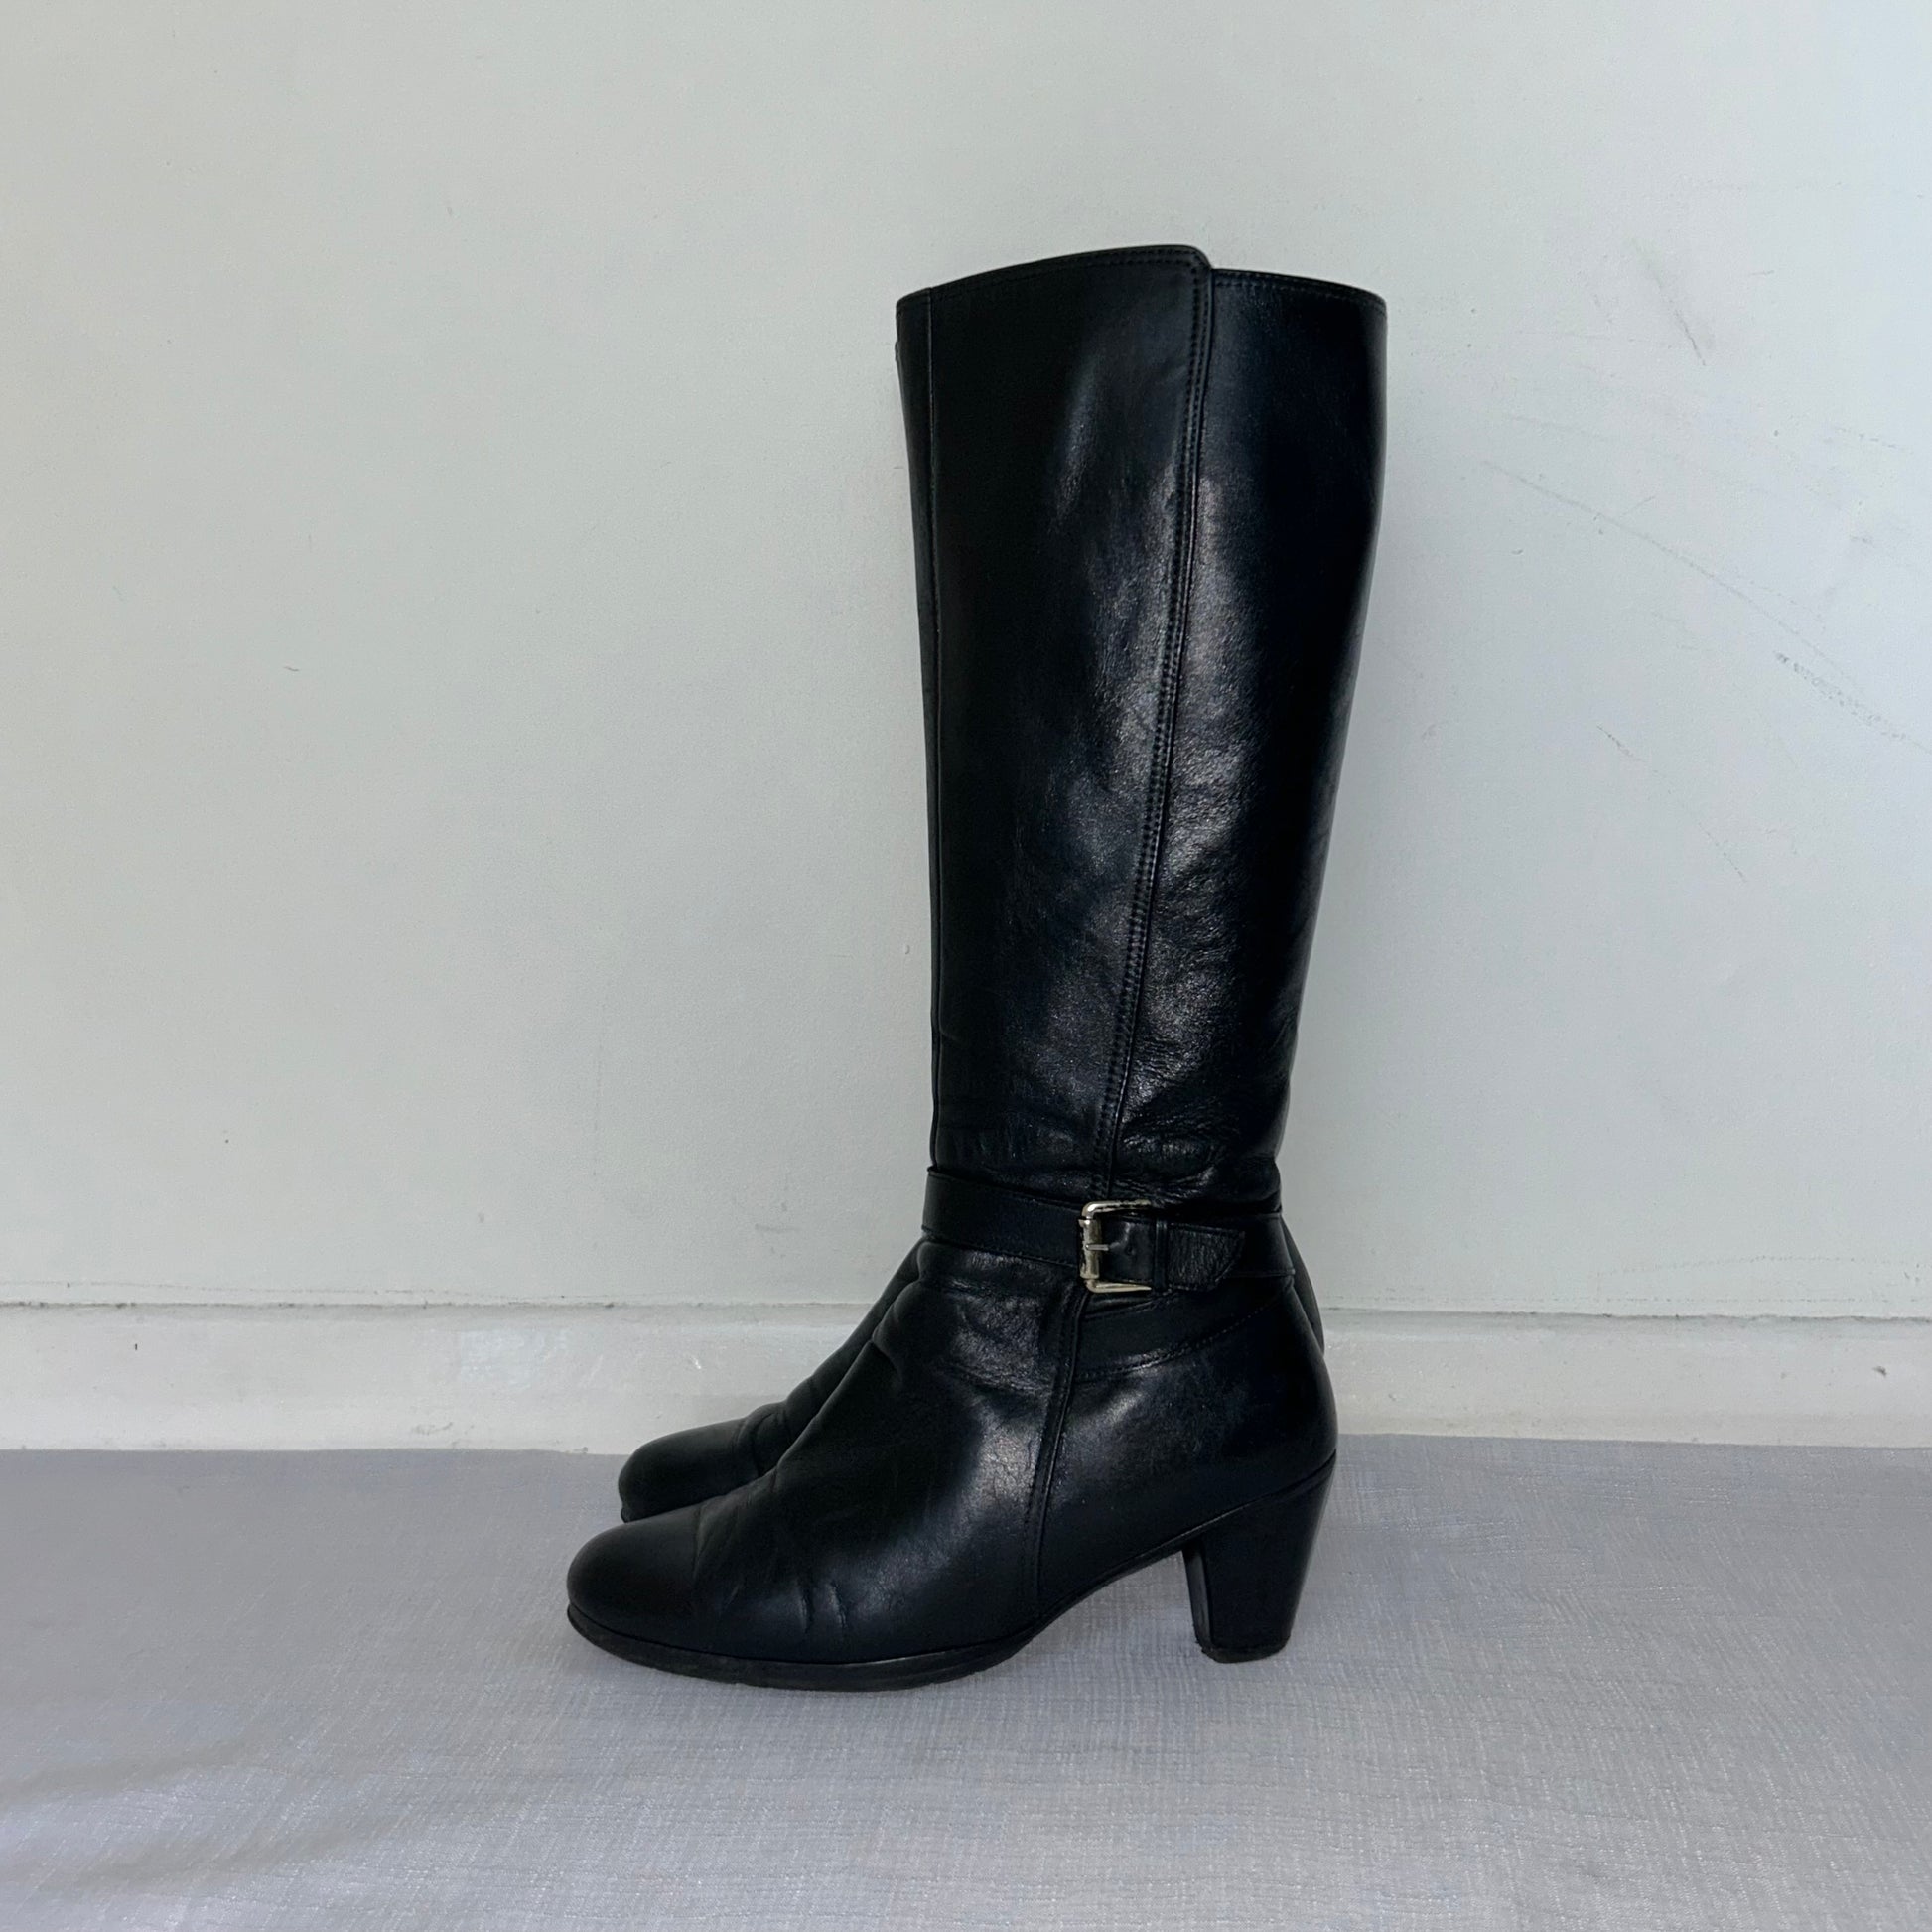 black knee high silver buckle boots shown on a white background